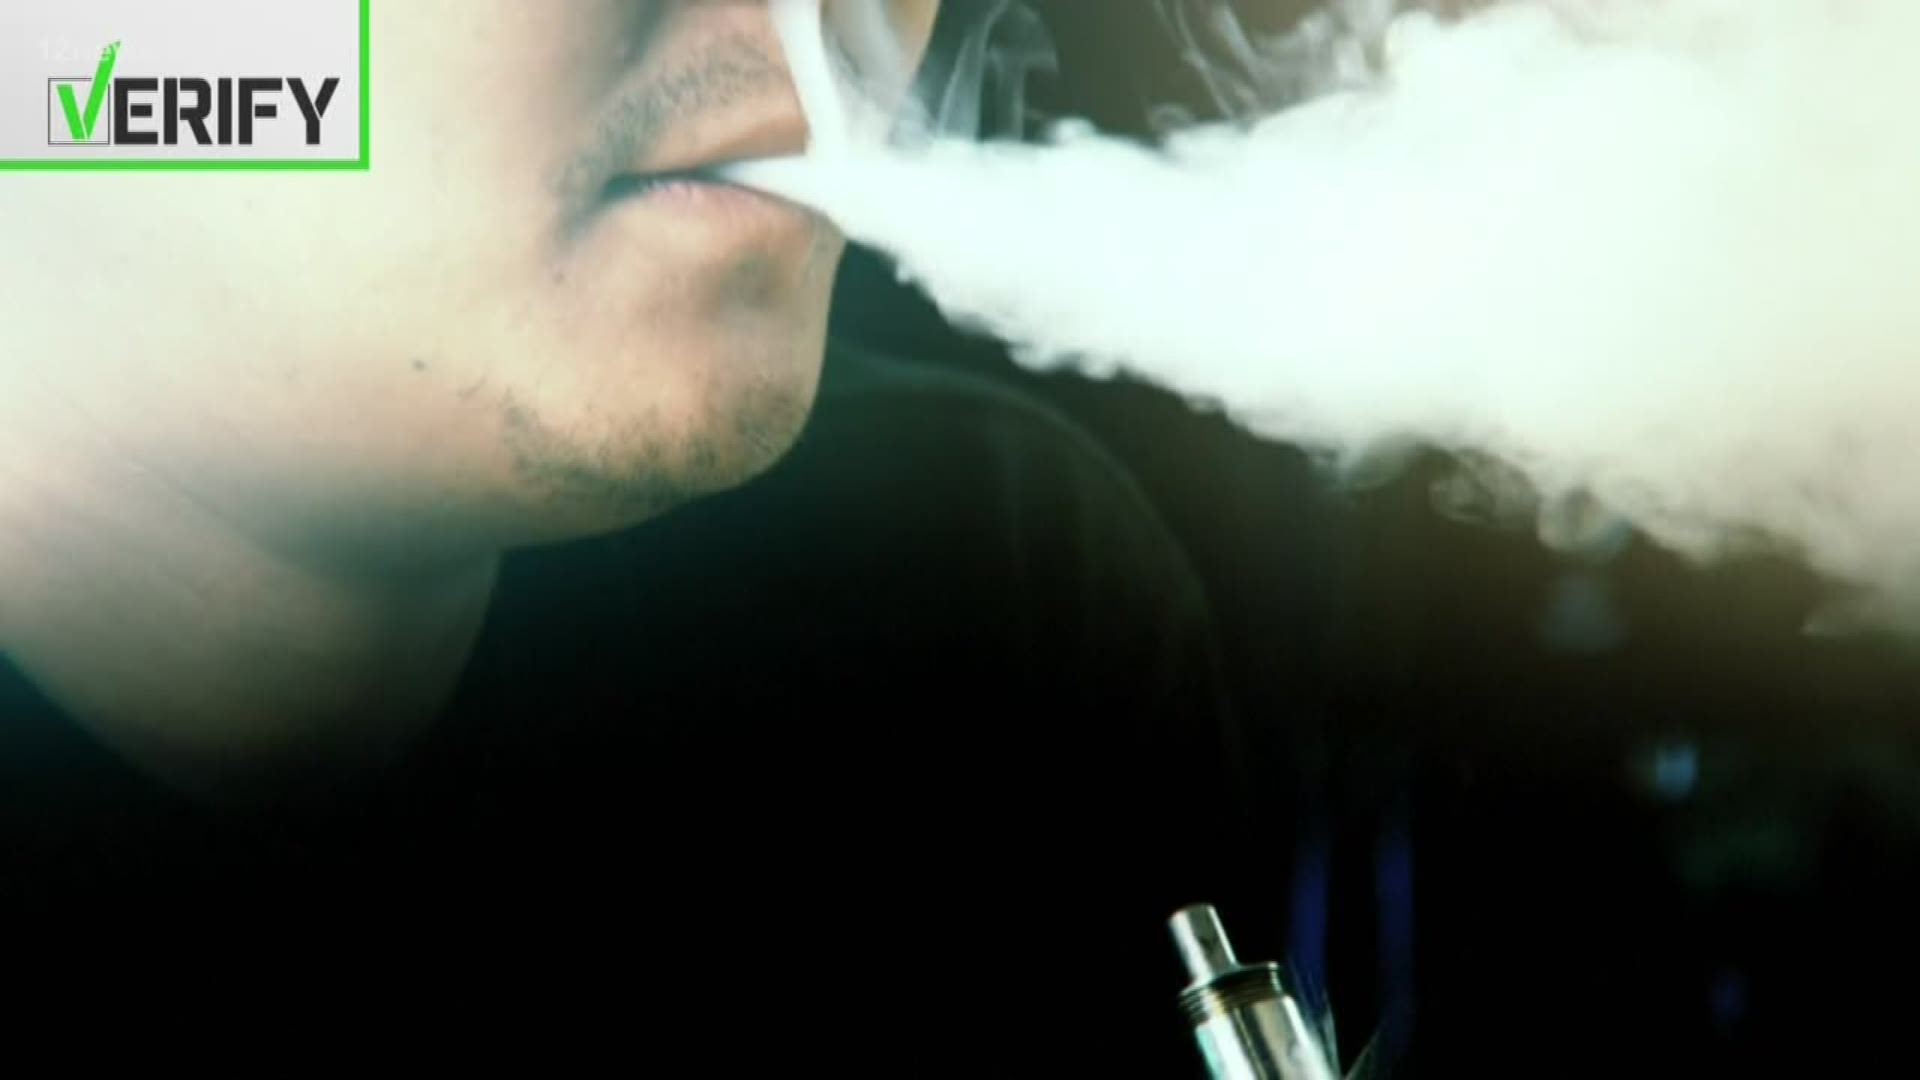 One bill would raise the legal age for buying cigarettes and vapor products to 21. The other bill is aimed at redefining vapor products as tobacco.